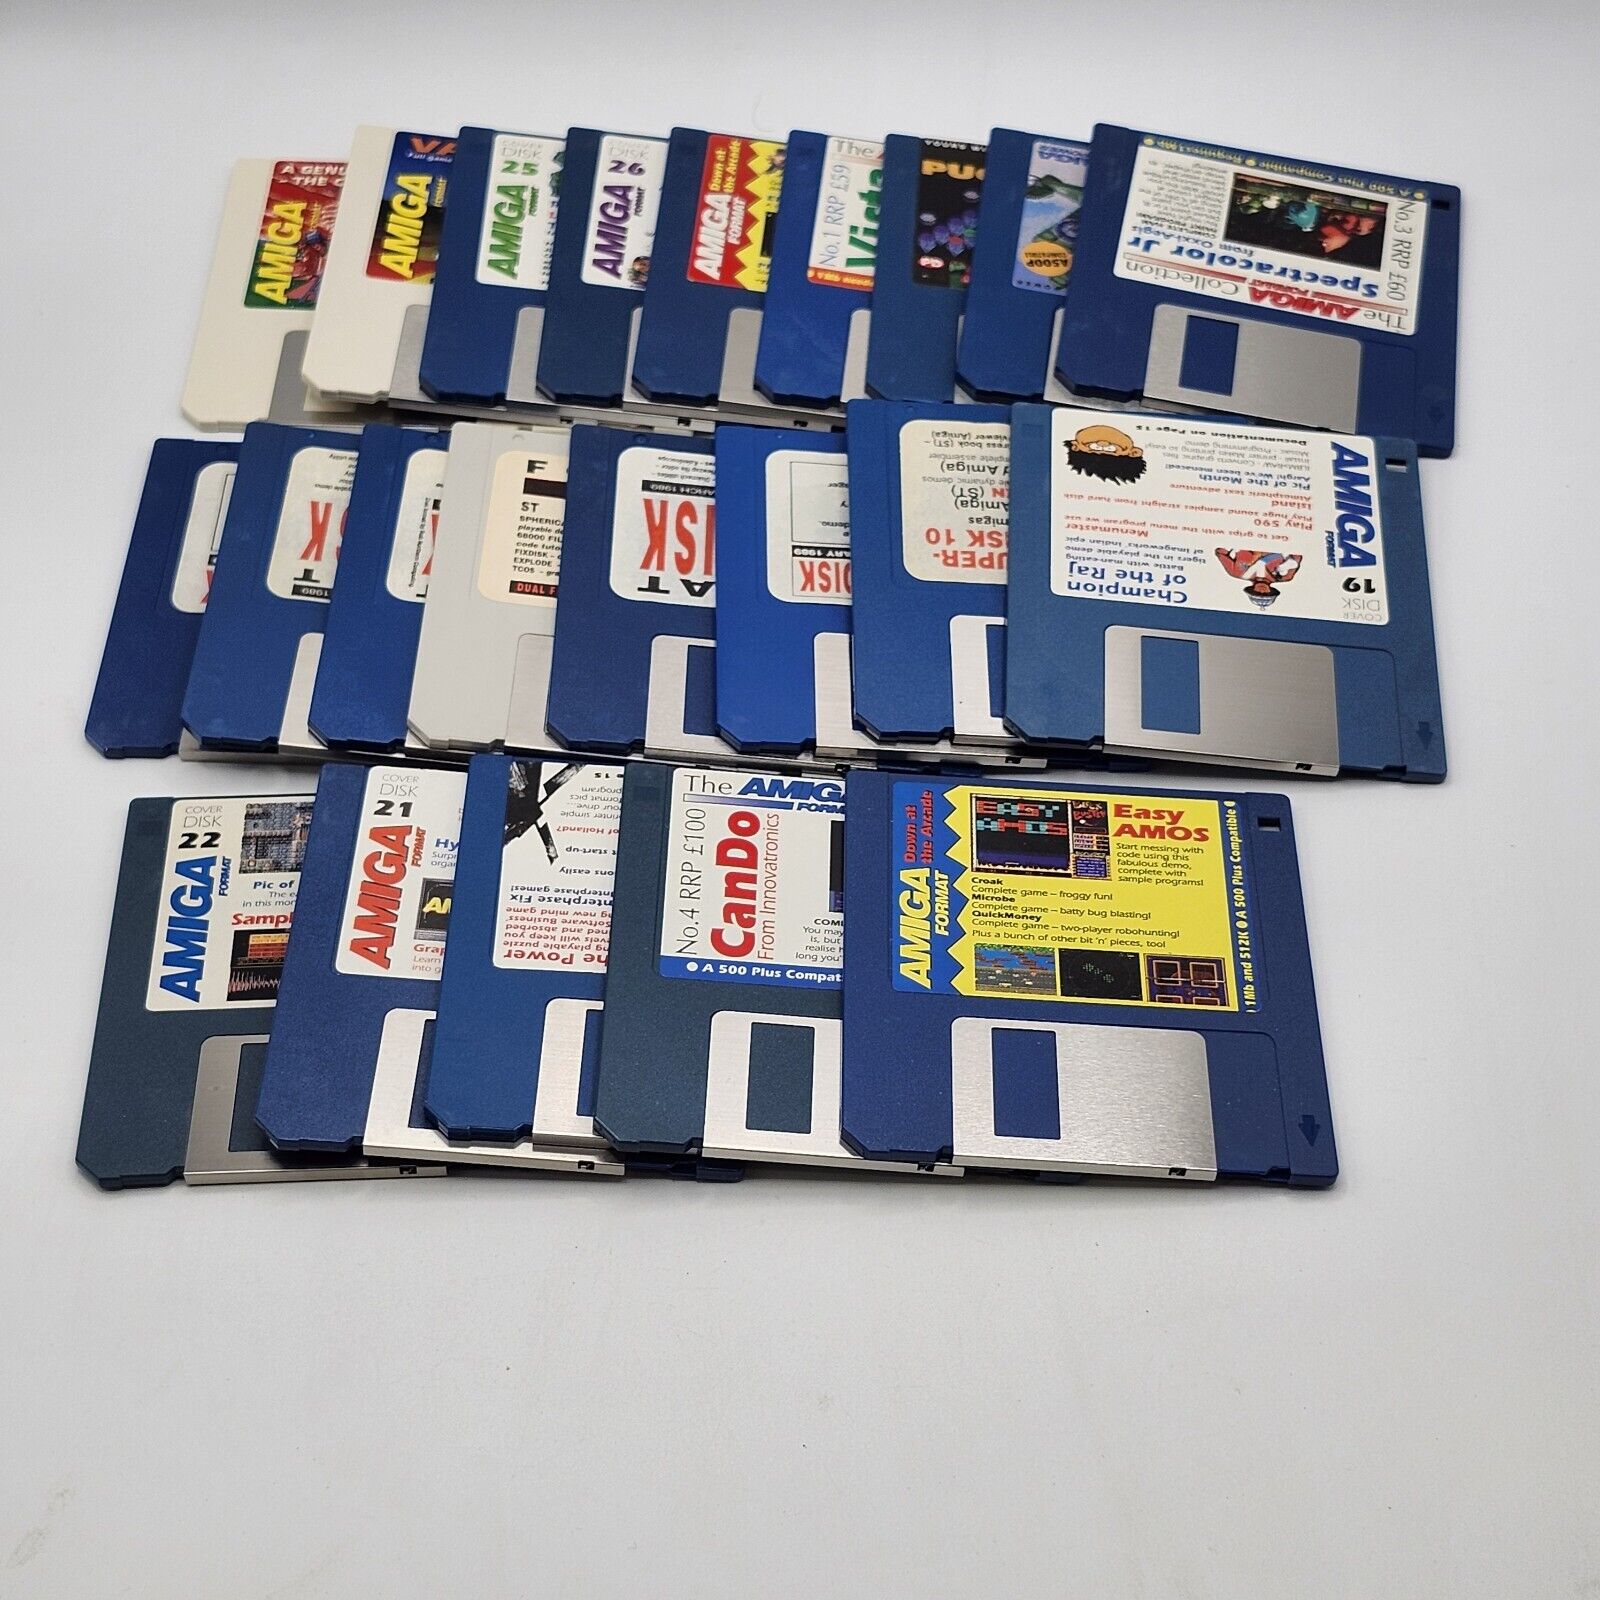 Lot Of 22 3.5 Floppy Disk Games Software Cover Superdisk Format Commodore Amiga 